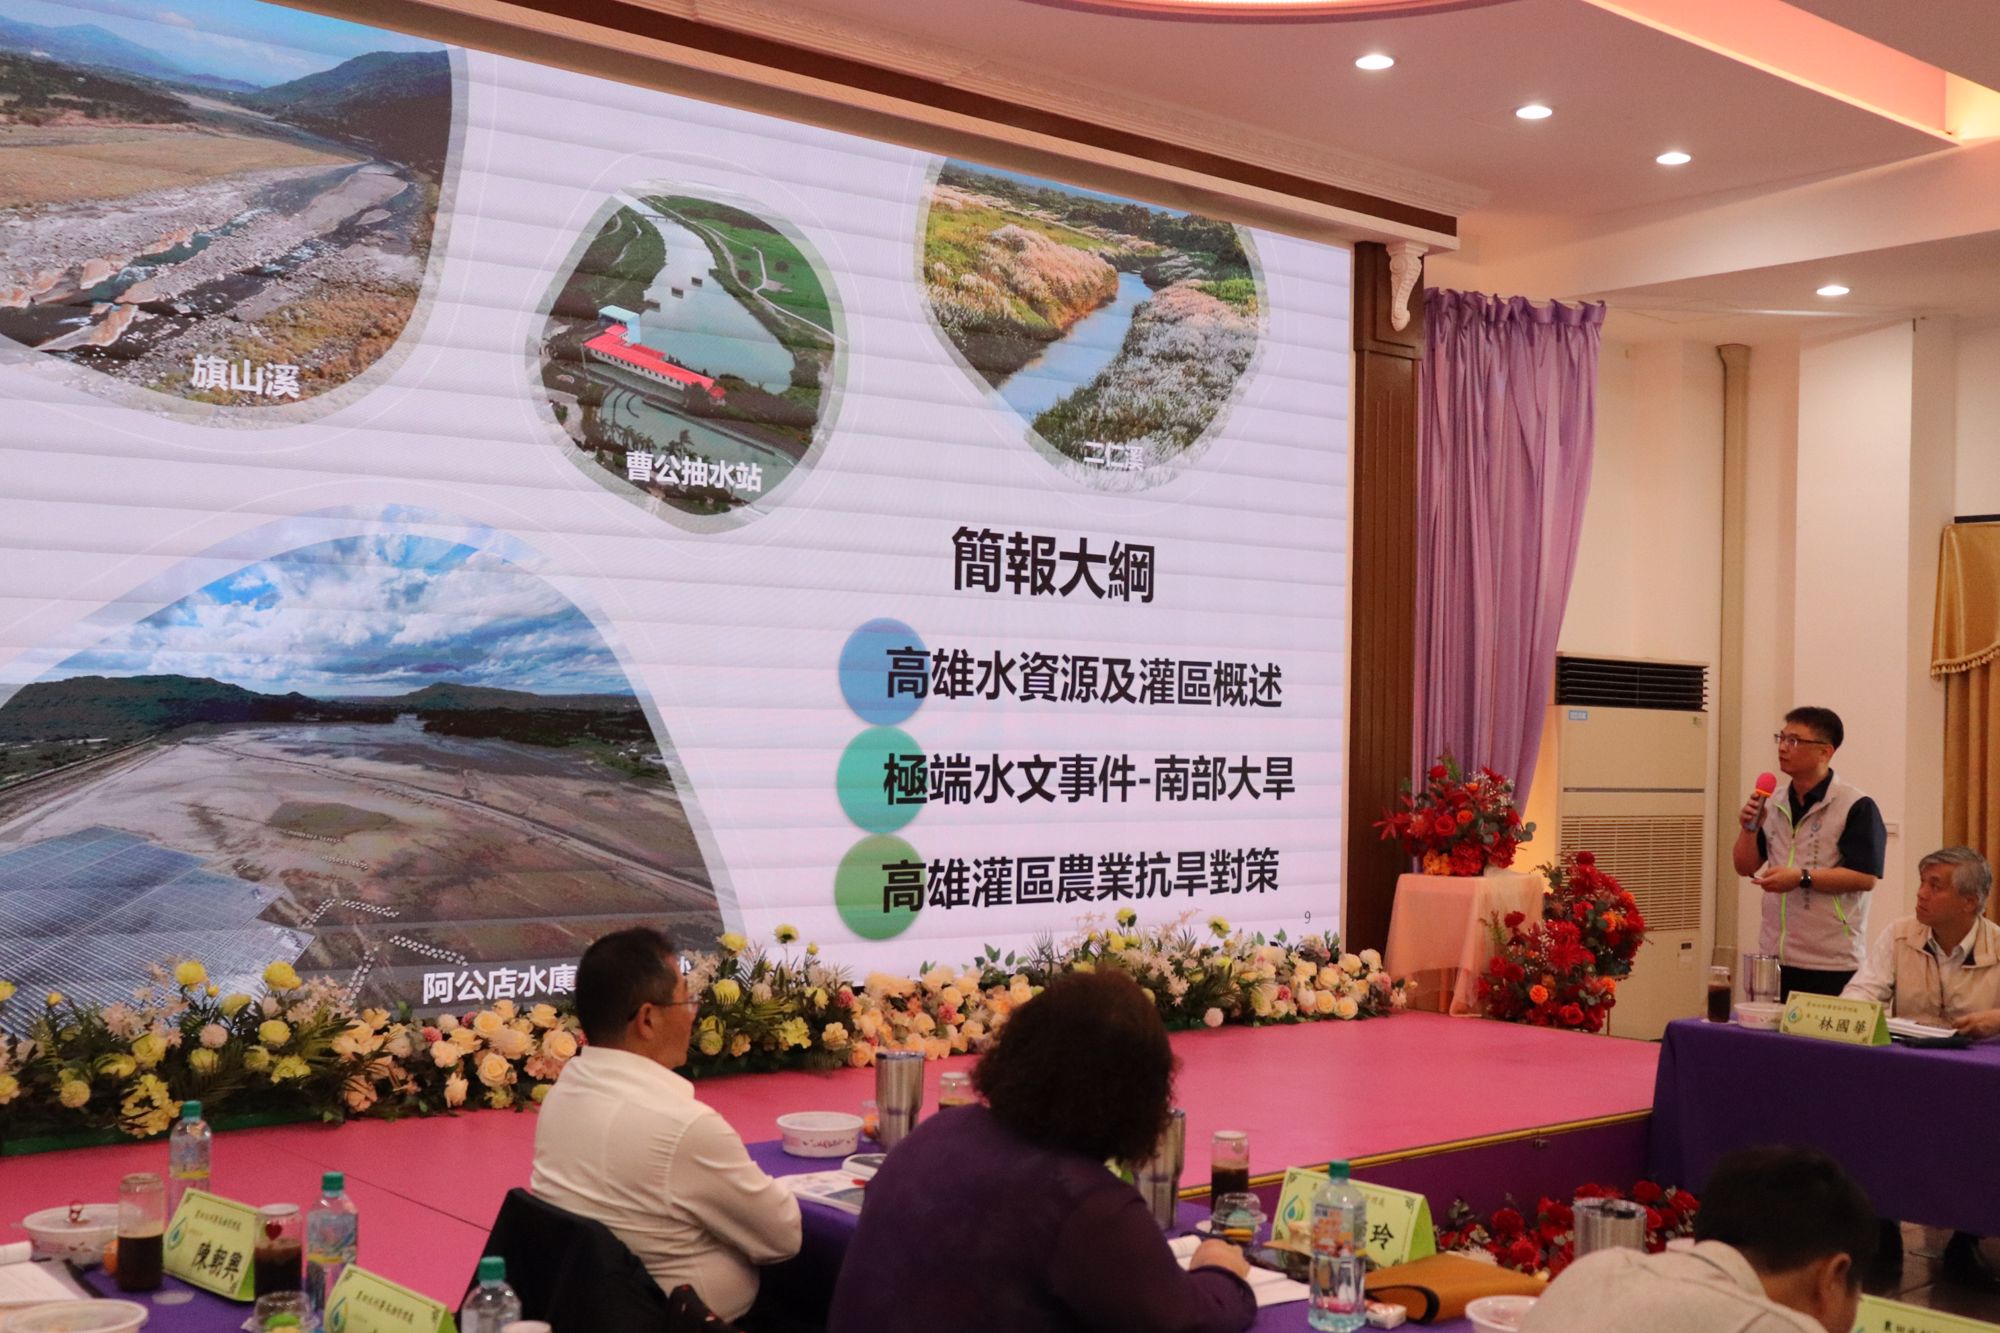 The Kaohsiung Management Office presented the Successful Drought Resistance Experience in Kaohsiung in 2023.